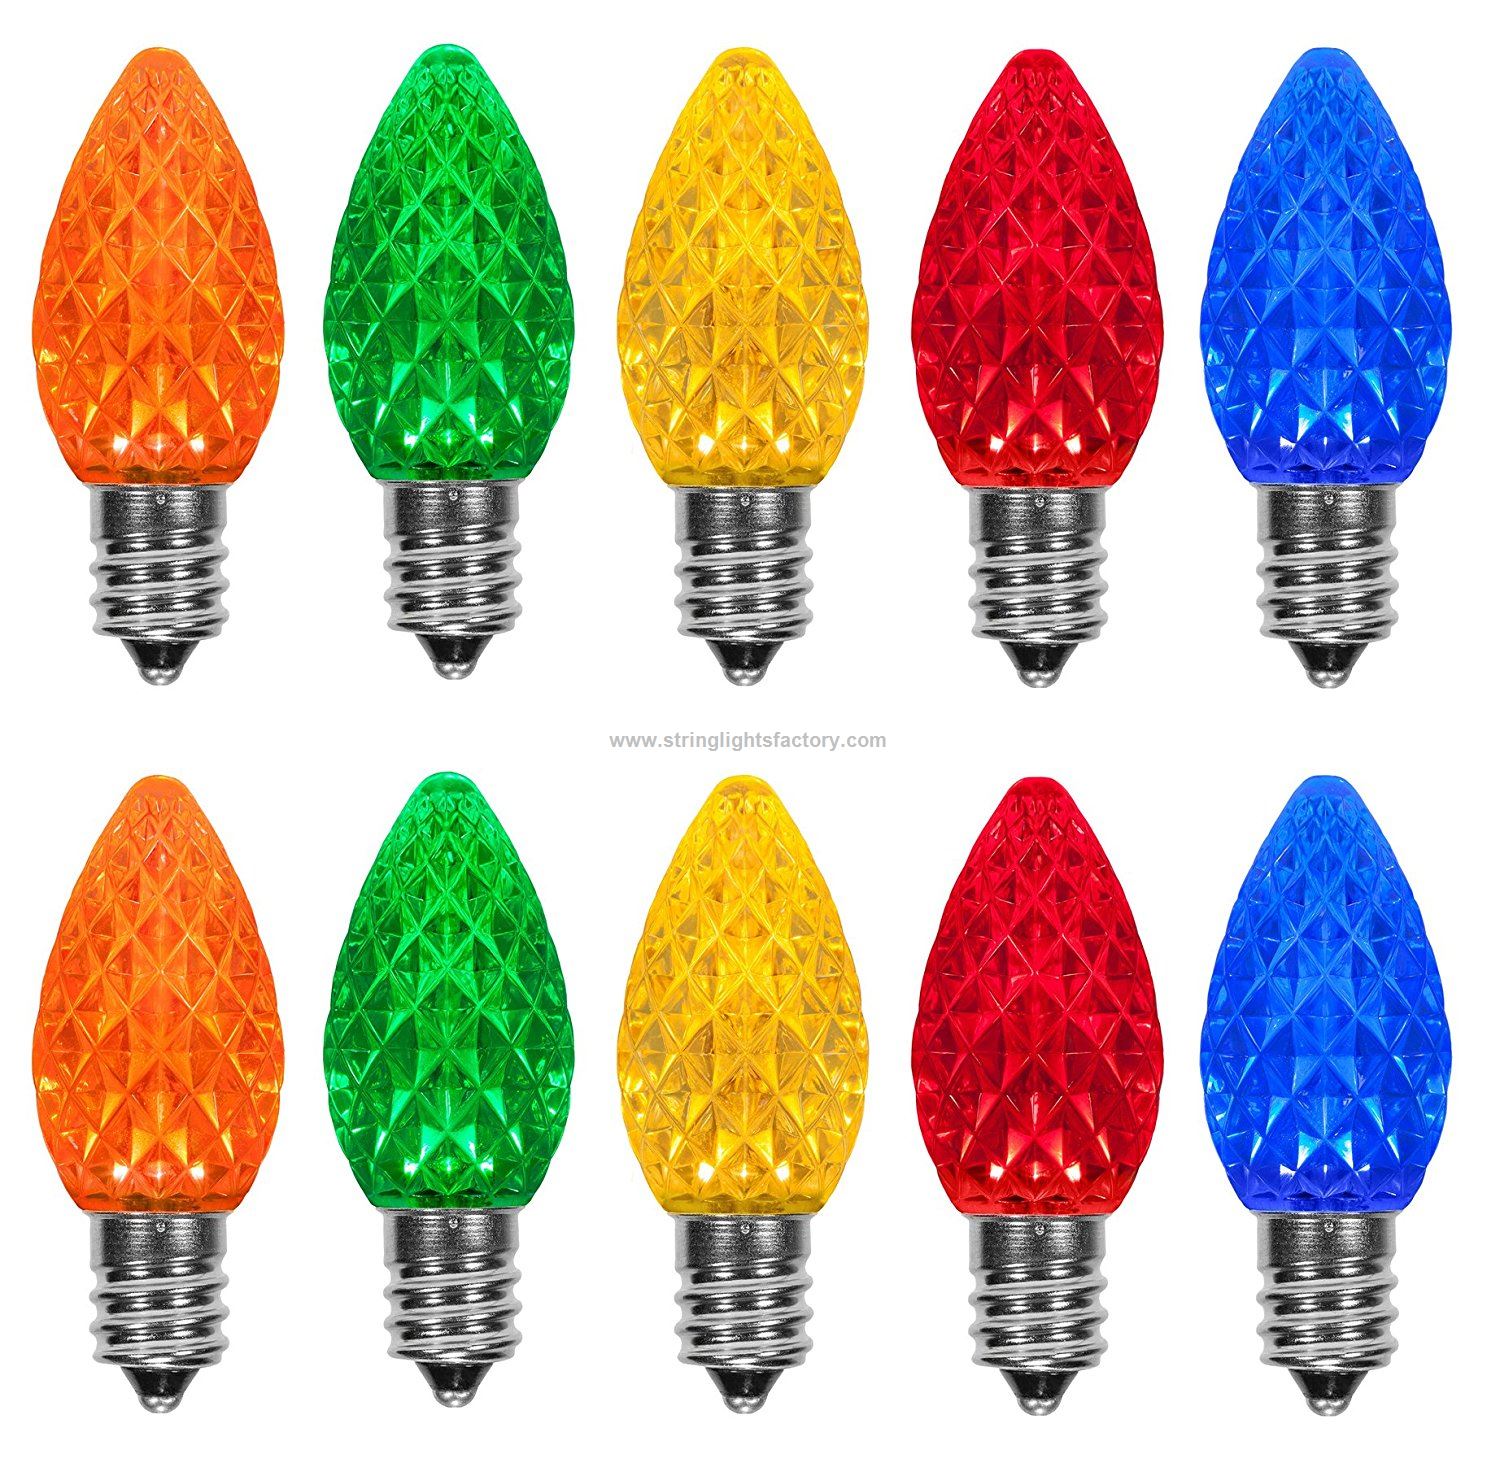 C7 Bulbs Lights Red Blue Yellow Green Color for Xmas Replacement Bulbs